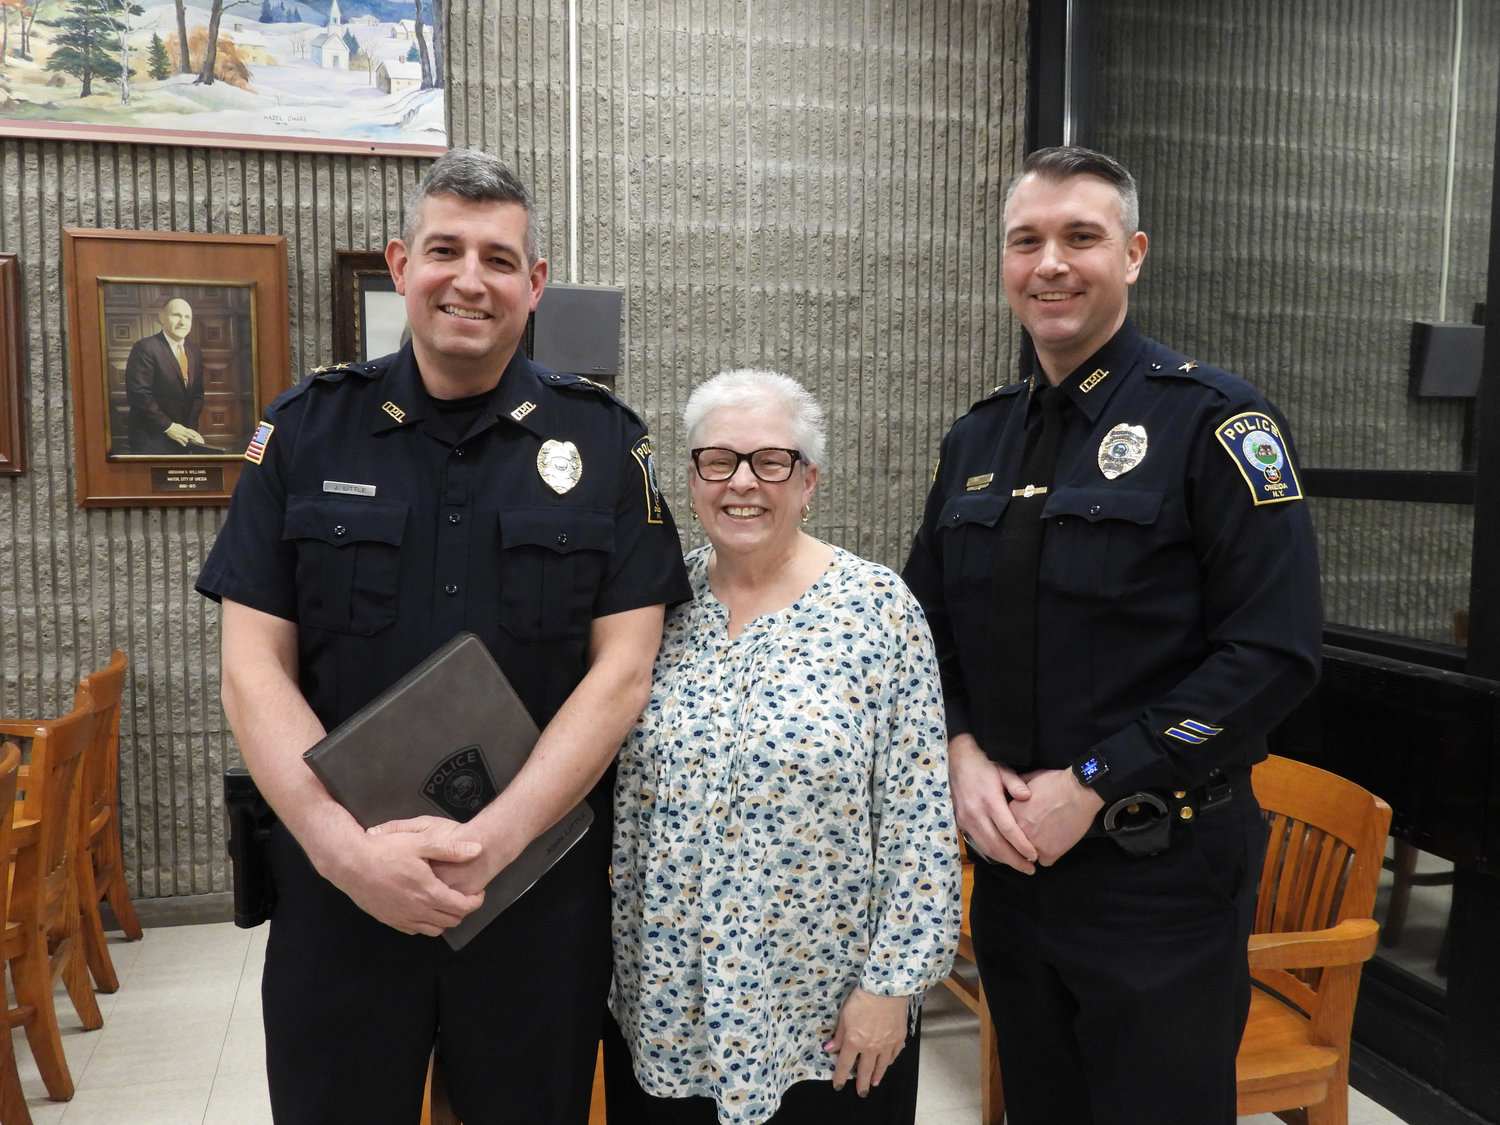 Mayor Helen Acker stands with Police Chief John Little and Assistant Police Chief Steven Lowell. Little has announced his retirement, effective Feb. 20. Lowell has been tapped by Acker to succeed Little.